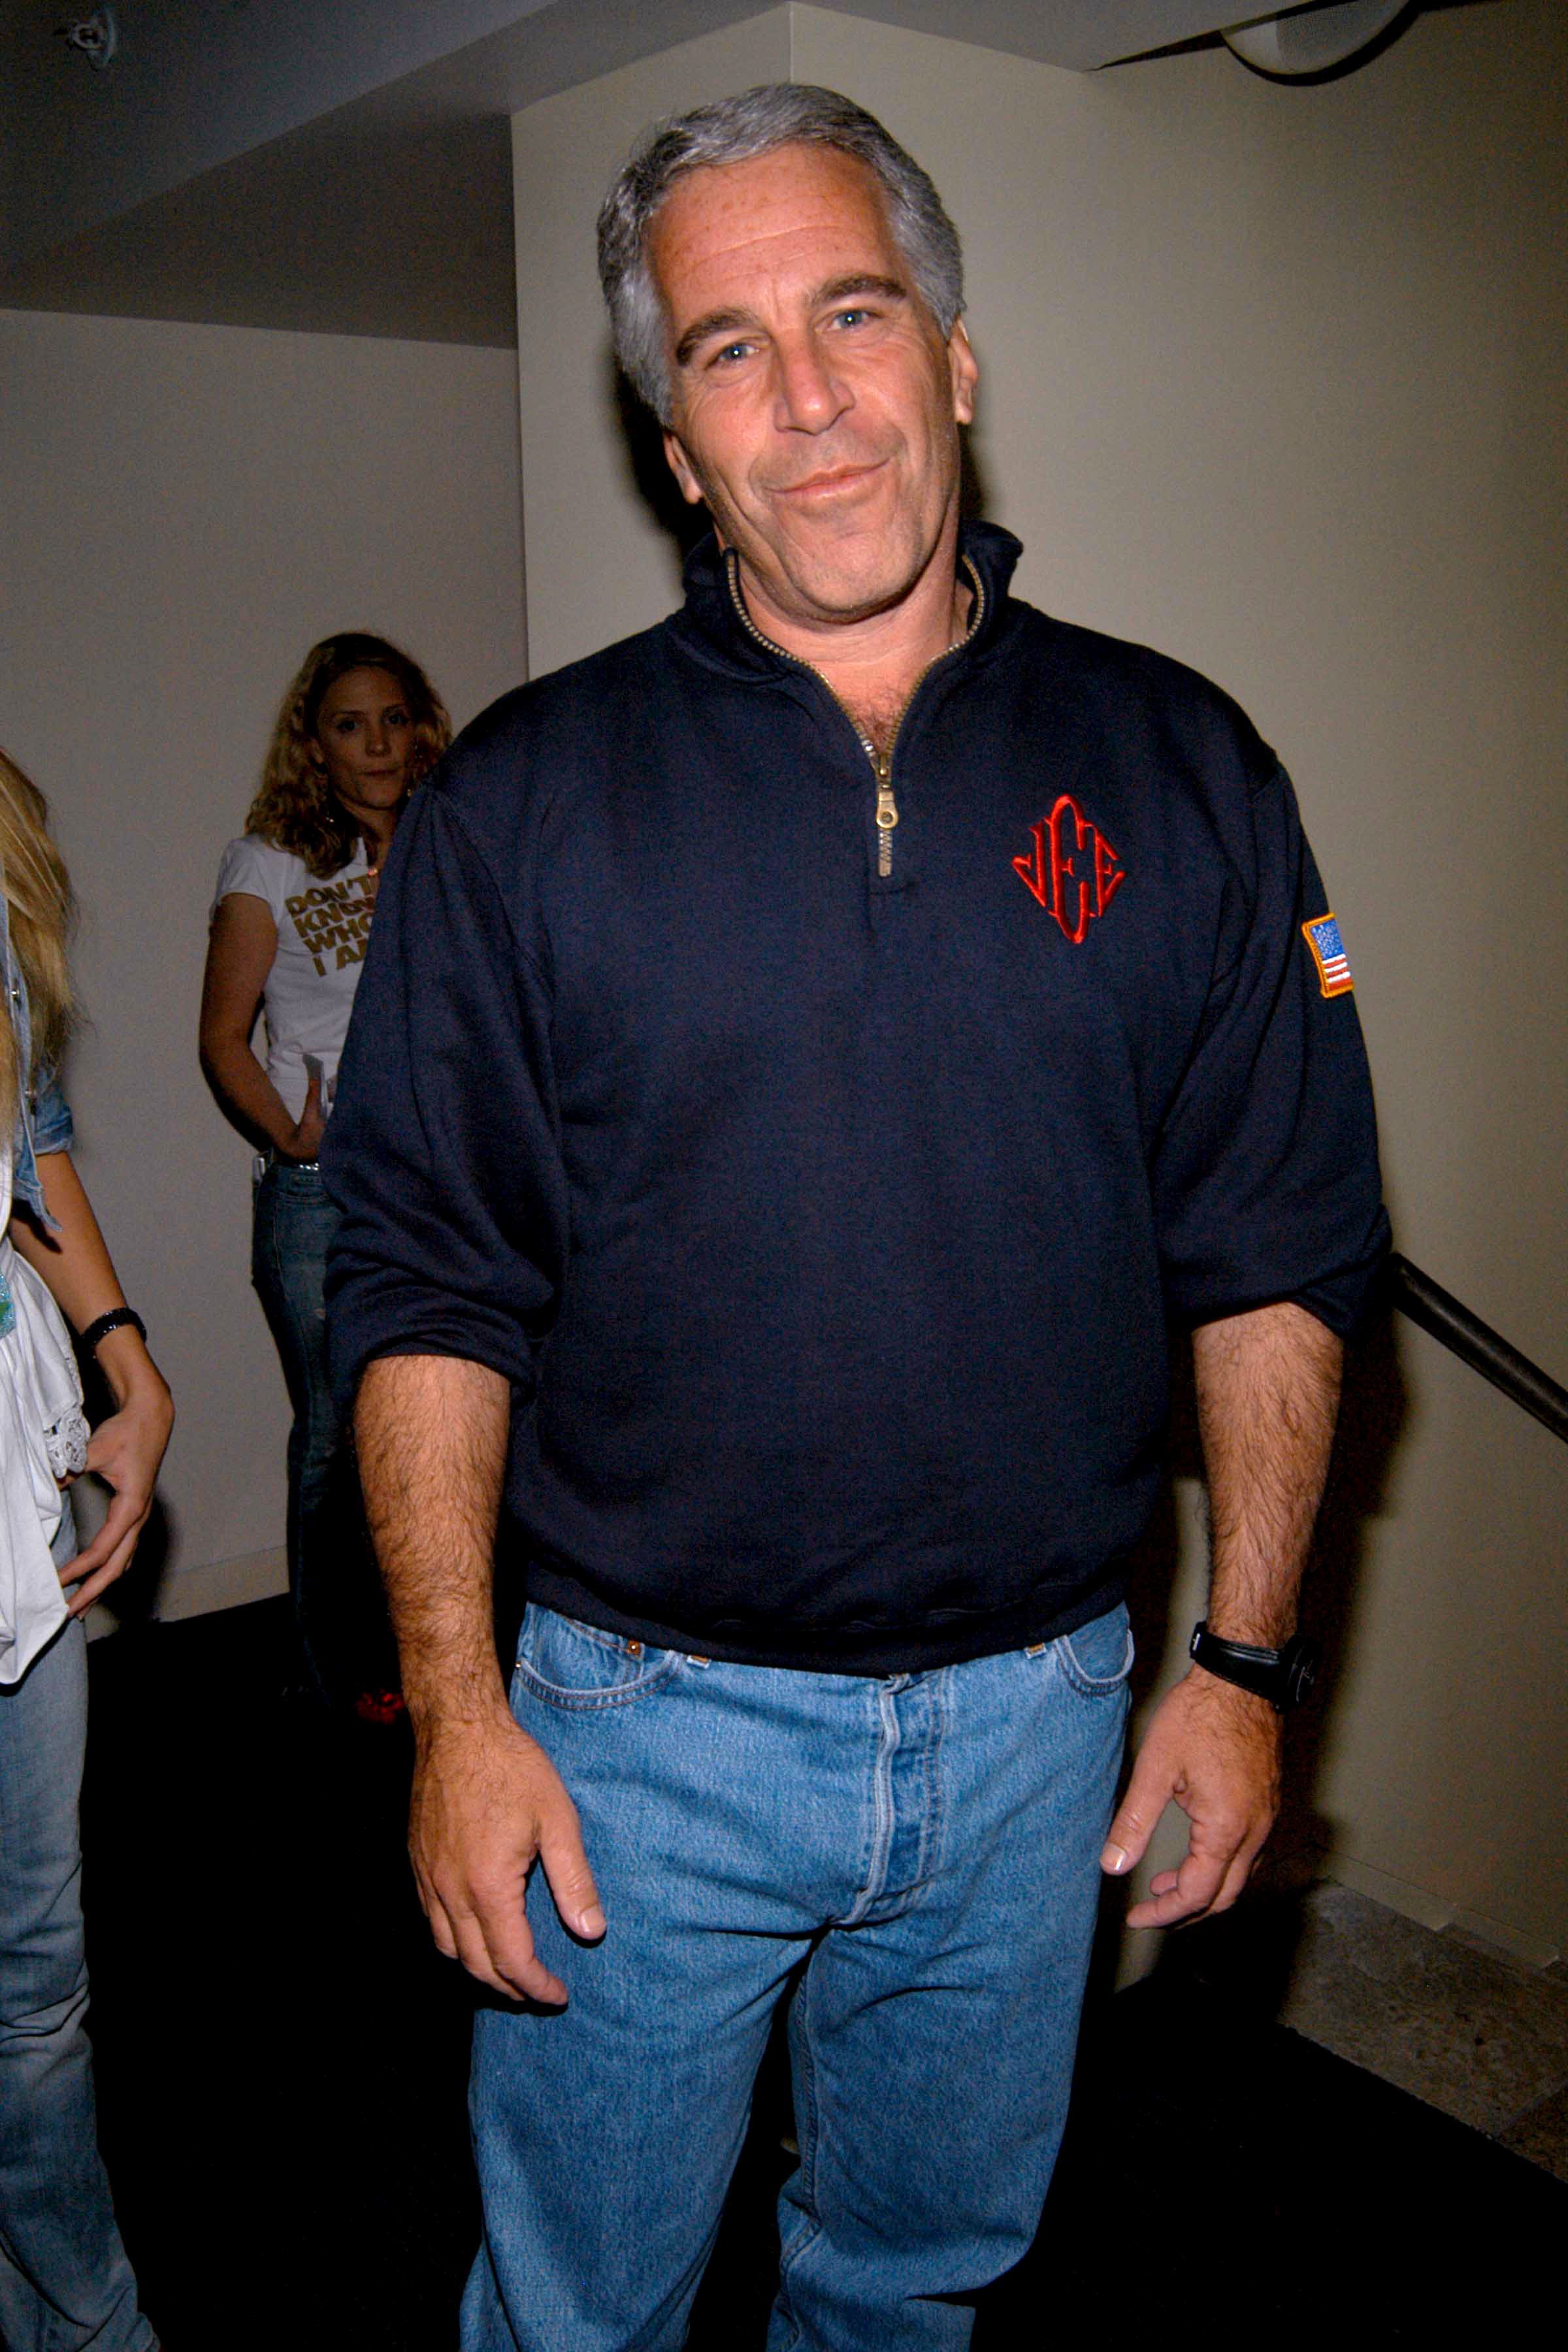 Jeffrey Epstein attends Launch of RADAR MAGAZINE at Hotel QT on May 18, 2005 in New York City. | Source: Getty Images